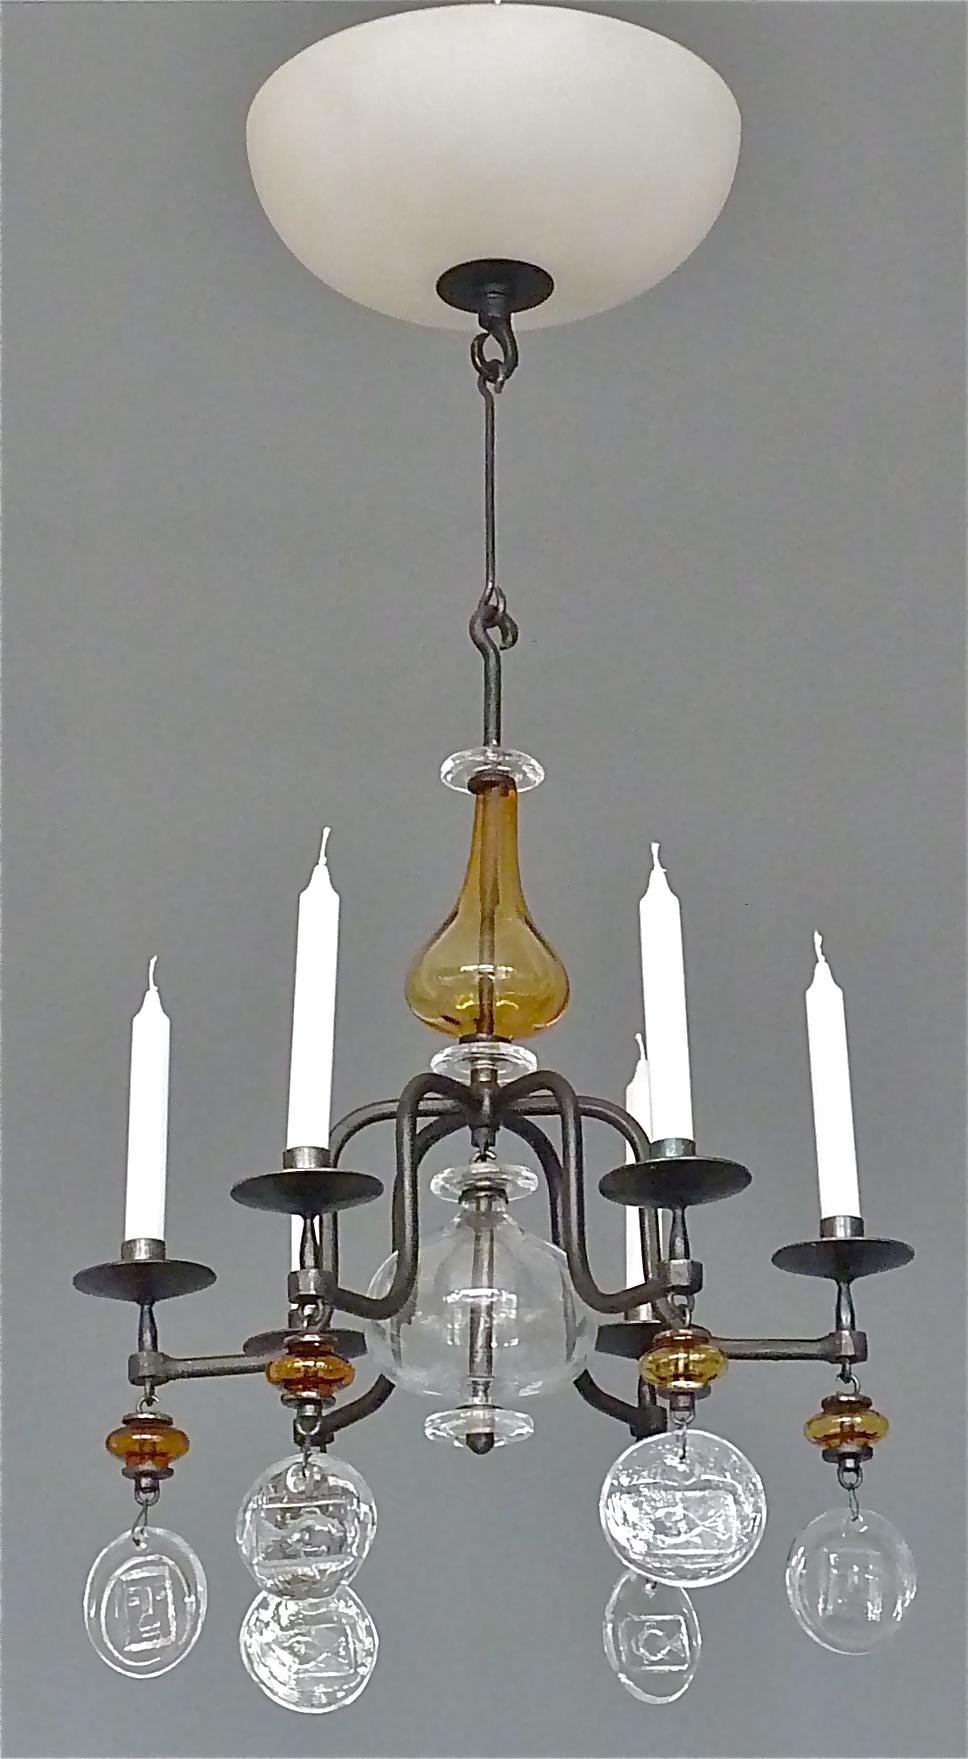 Beautiful and rare Scandinavian Modern electrified six-arm black wrought iron chandelier designed by the famous artist Erik Höglund and executed by Boda Nova Glassworks / Axel Stromberg Ironworks, Sweden, circa 1960-1970. The chandelier has clear